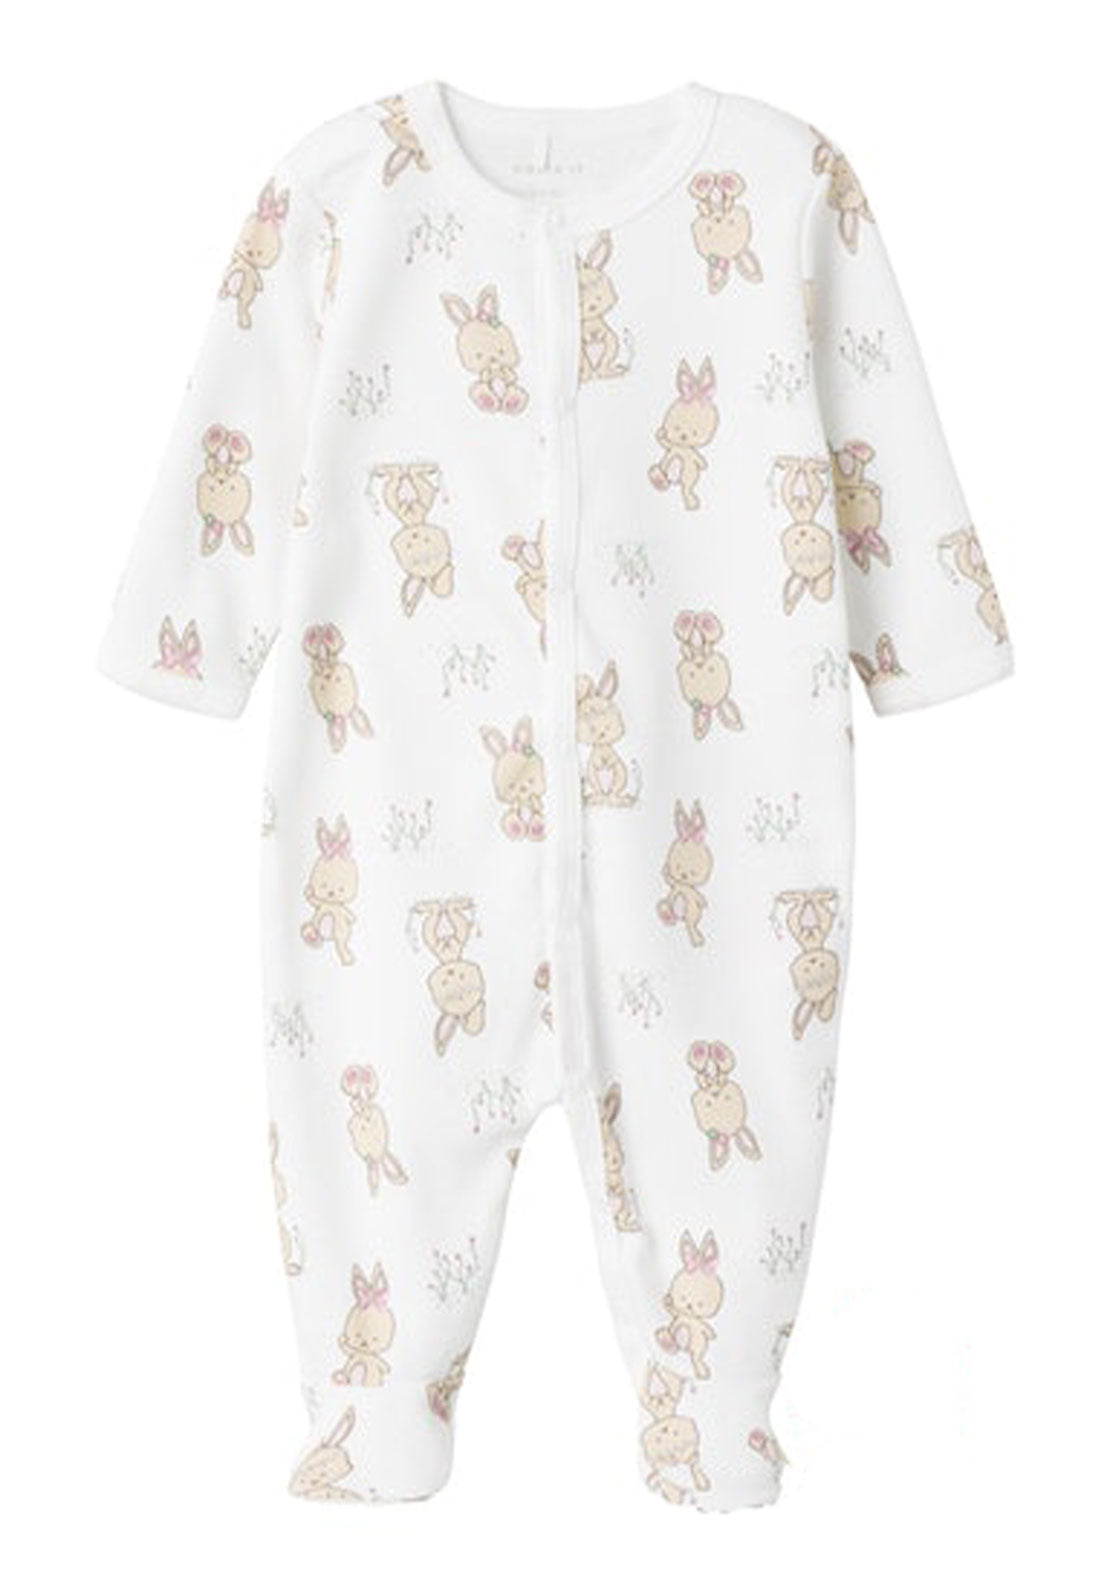 Name It Long Sleeve Rabbit Onsie With Feet - White 1 Shaws Department Stores